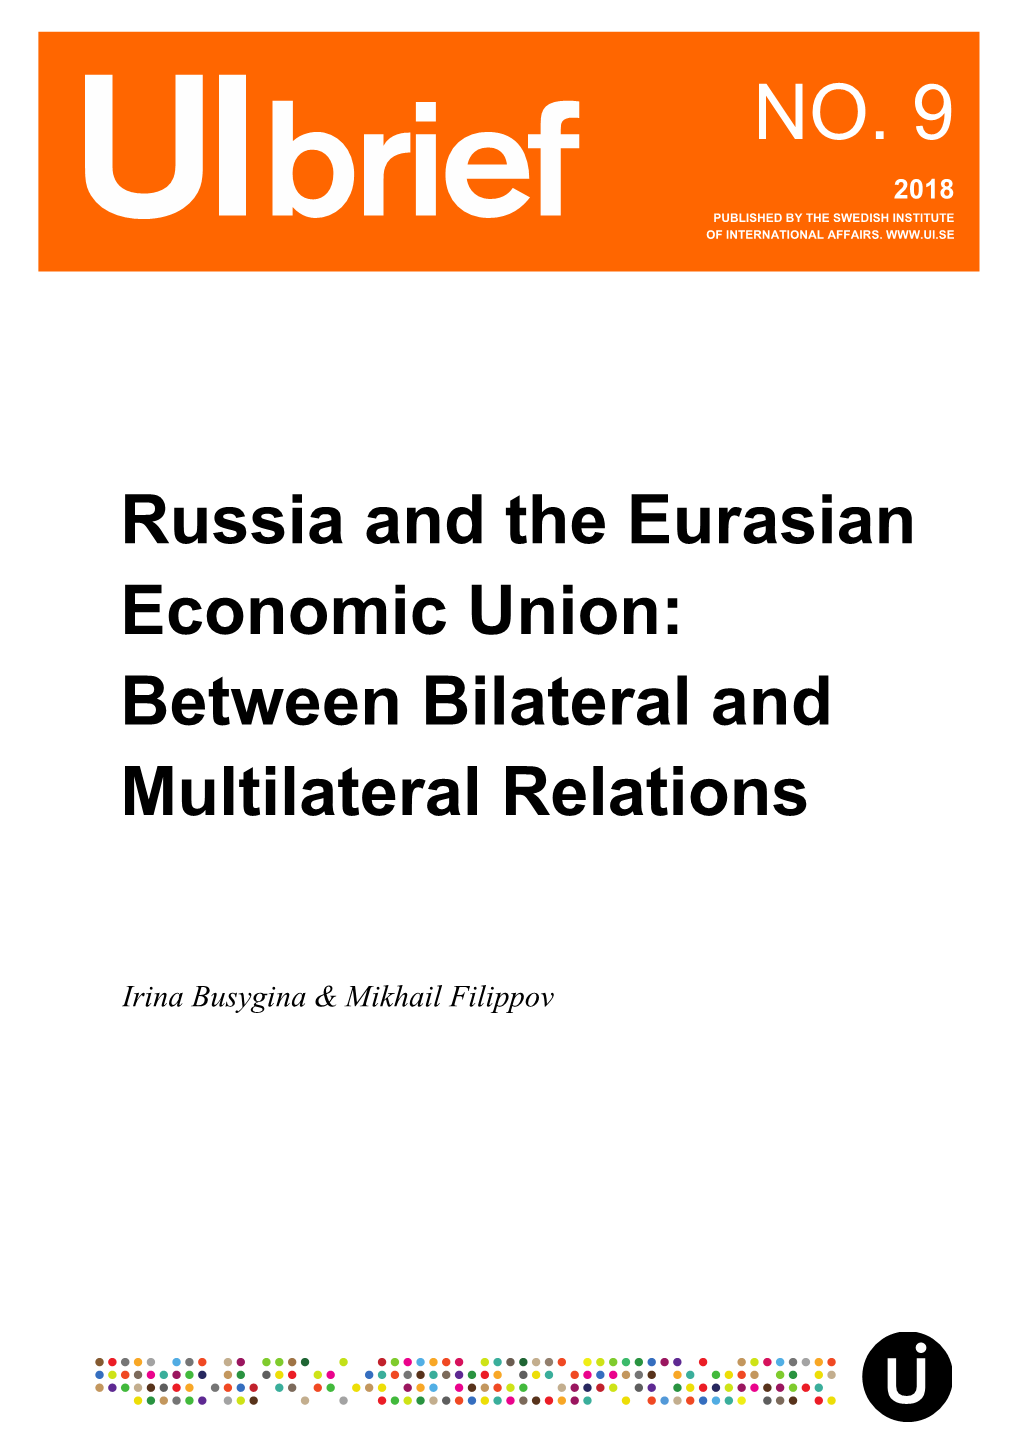 Russia and the Eurasian Economic Union: Between Bilateral and Multilateral Relations